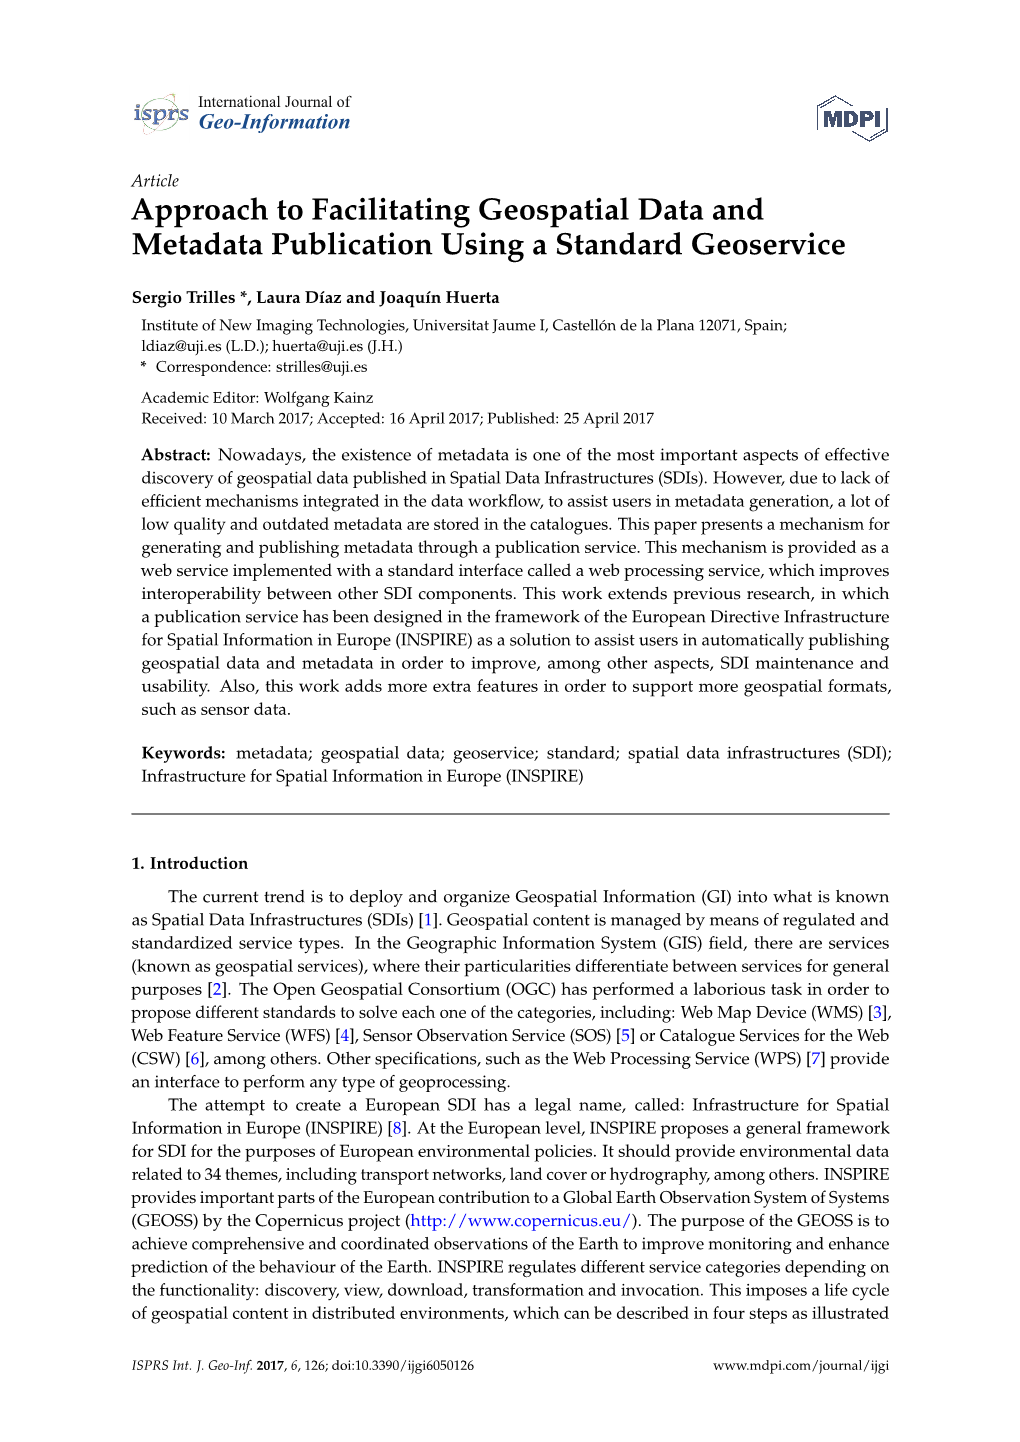 Approach to Facilitating Geospatial Data and Metadata Publication Using a Standard Geoservice